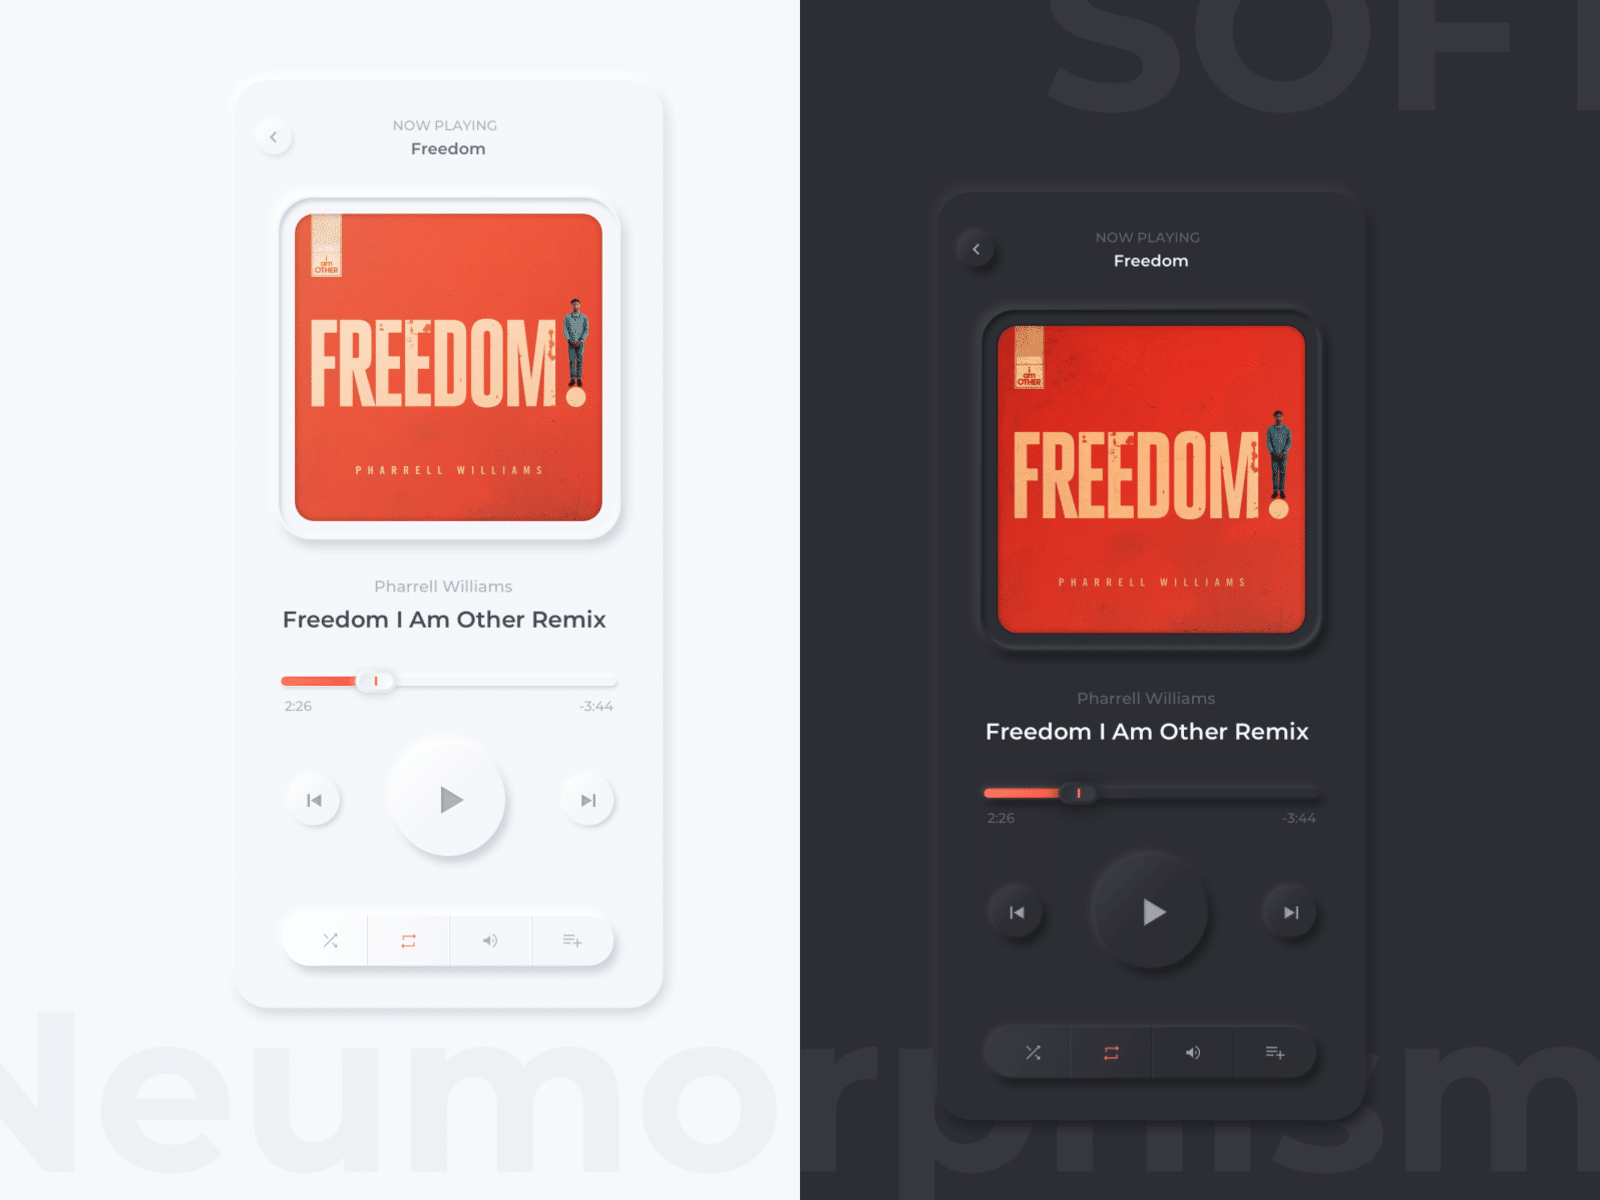 Light and dark mode of a music player. The dark mode one has way better contrasts.